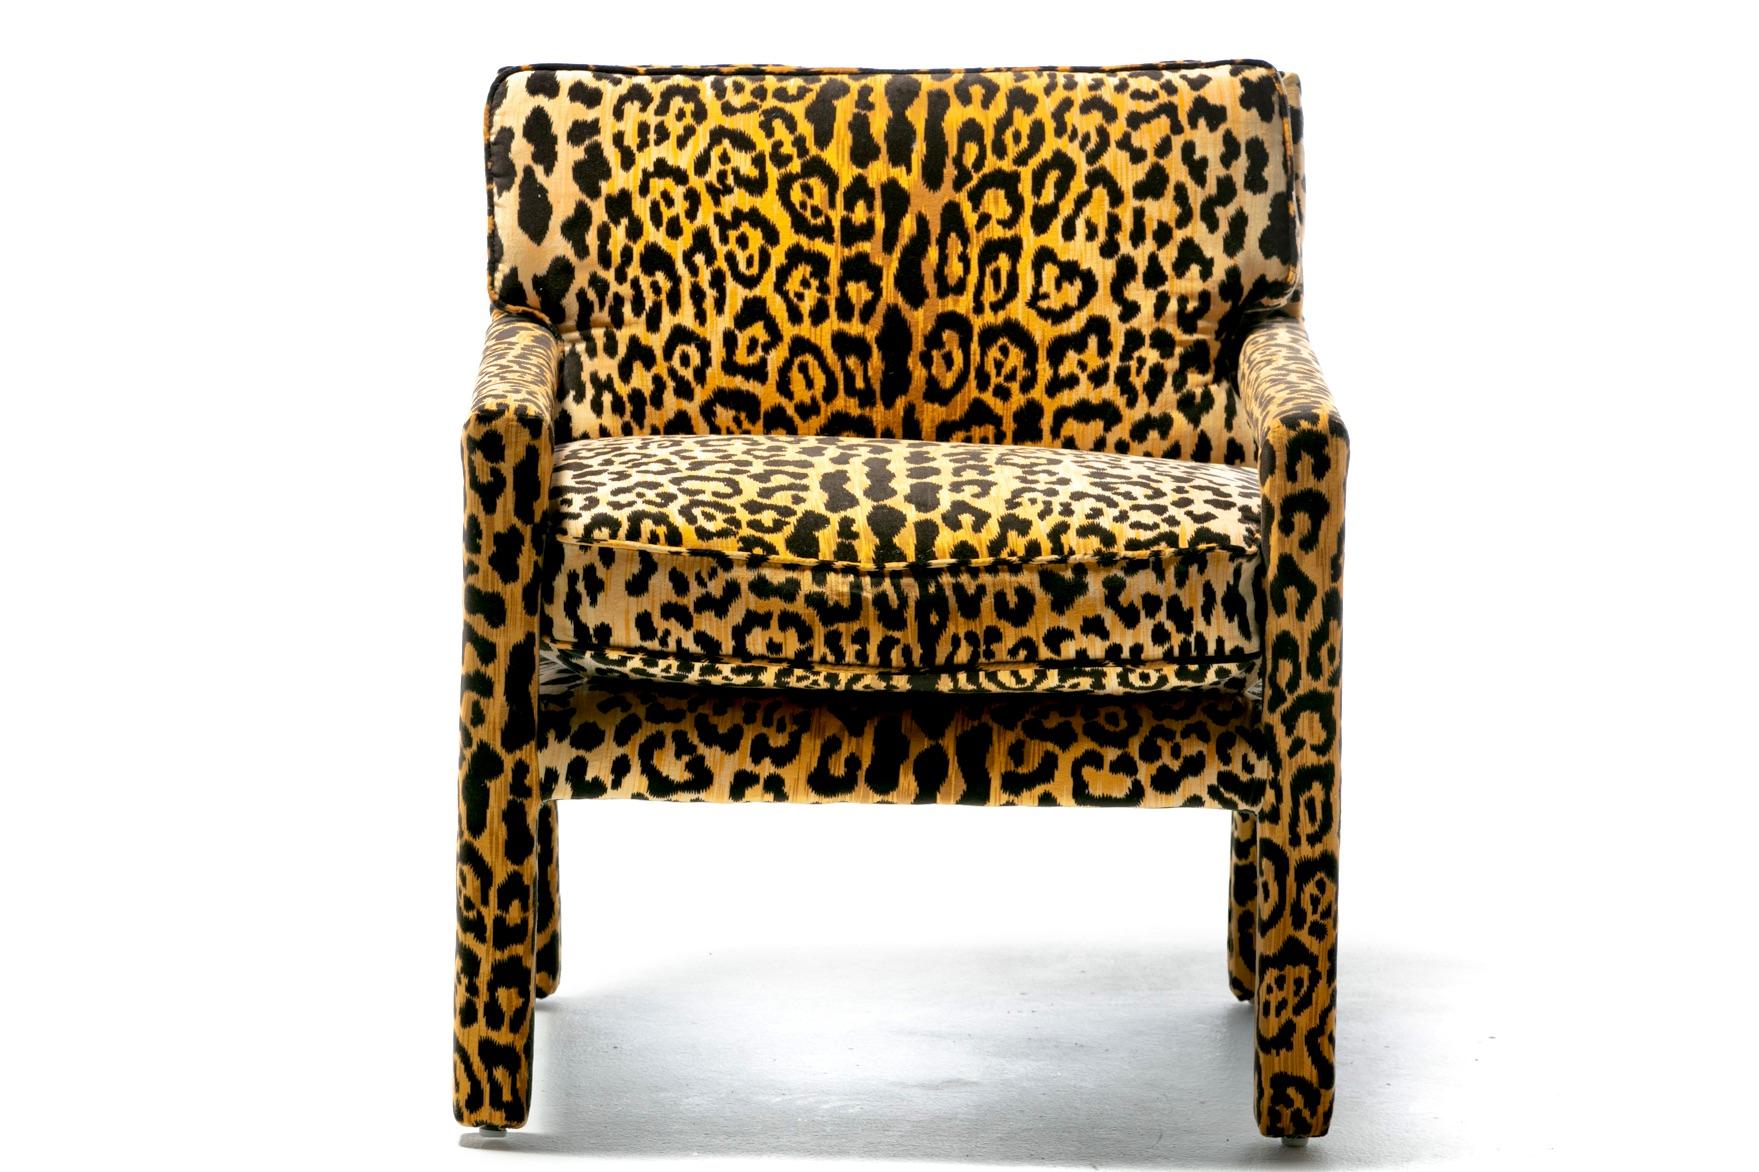 Timeless Milo Baughman Parsons style chair freshly reupholstered with forever sexy and stylish leopard velvet. Parsons chairs are unique in that every surface is upholstered - every inch of this arm chair is padded and covered in spots. The chair